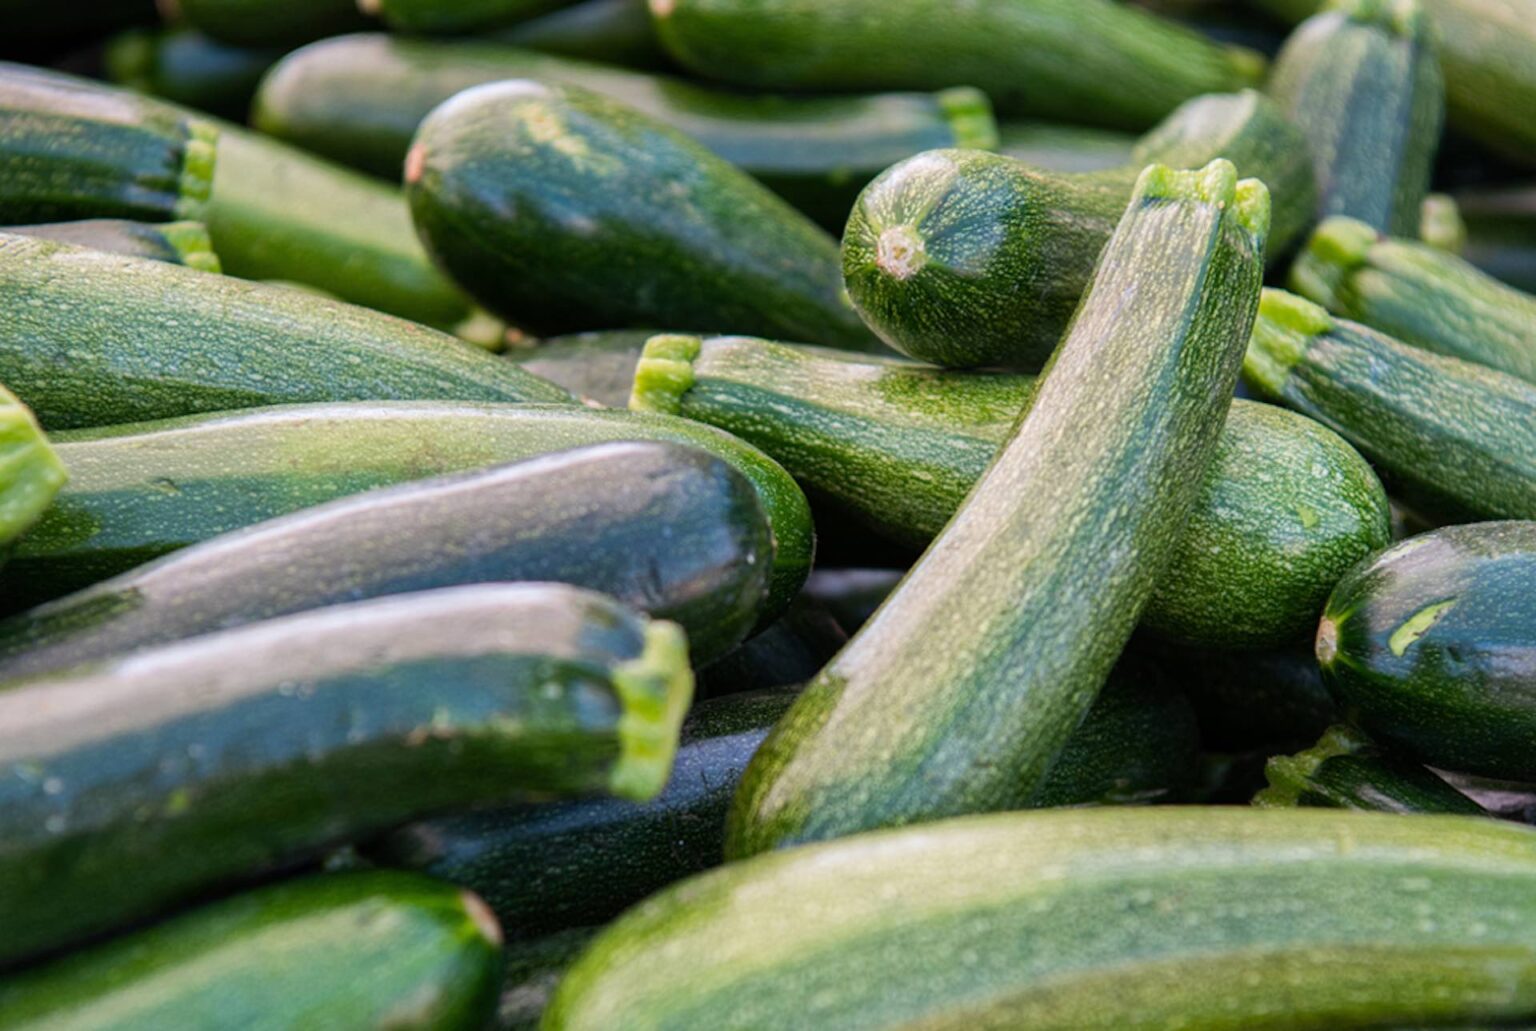 Swimsuit season is right around the corner! If you want to watch your carb intake, cook up these delicious zucchini and squash recipes tonight!